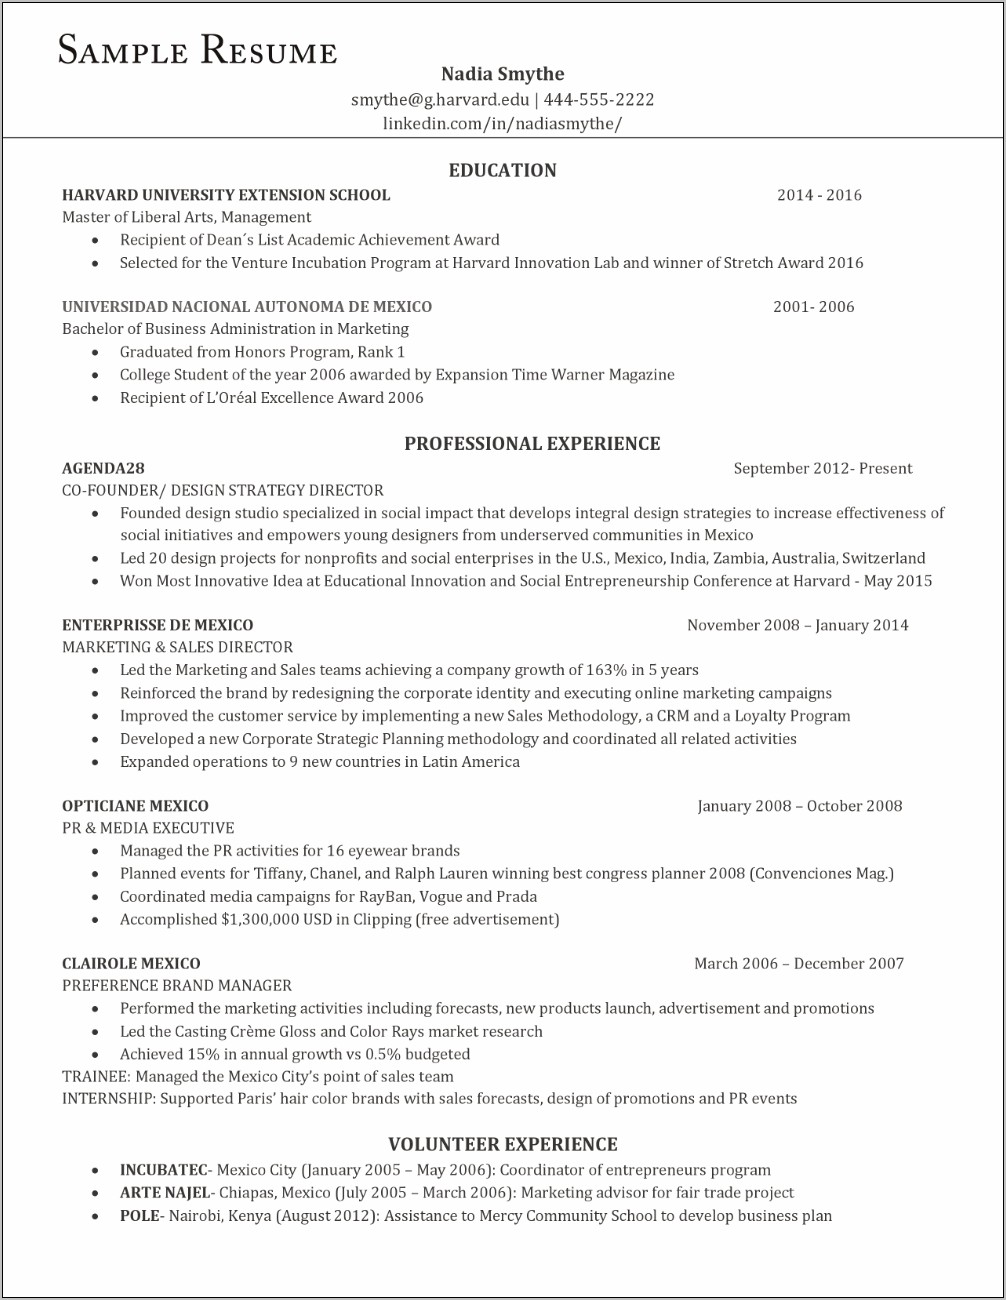 Resume Summery And Objective Harvard